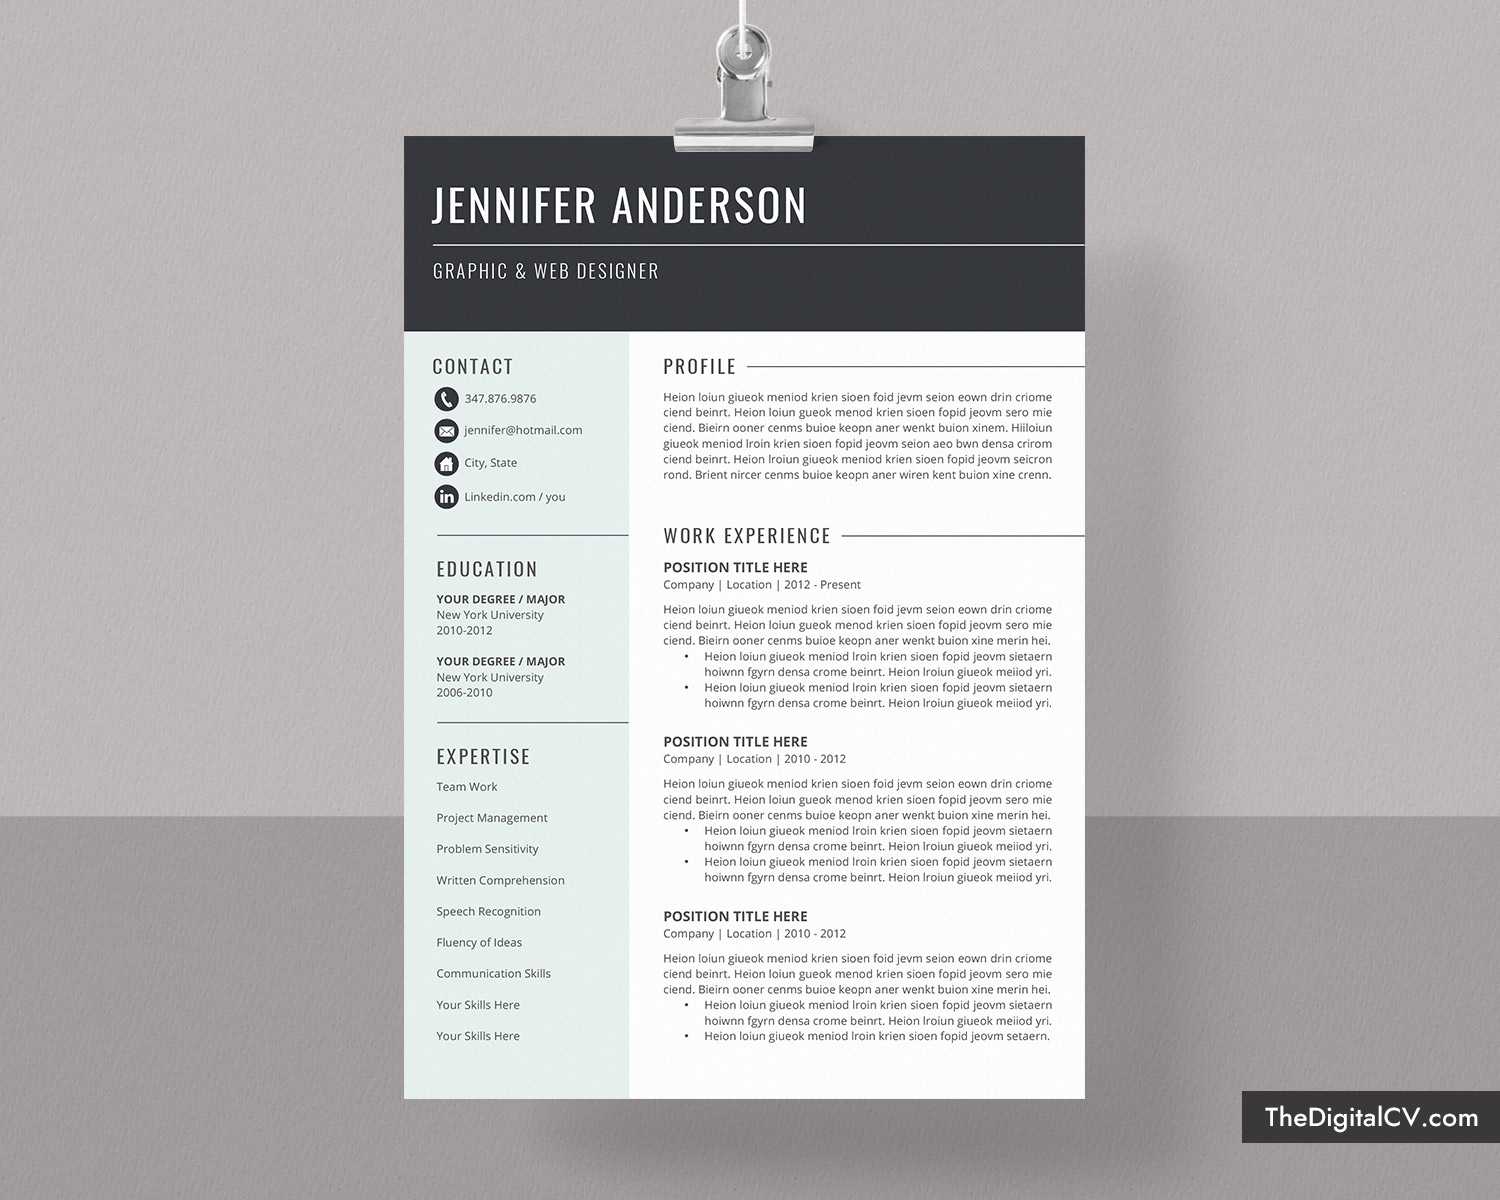 Basic And Simple Resume Template 2019 2020, Cv Template, Cover Letter,  Microsoft Word Resume Template, 1 3 Page, Modern Resume, Creative Resume, For Microsoft Word Resumes Templates